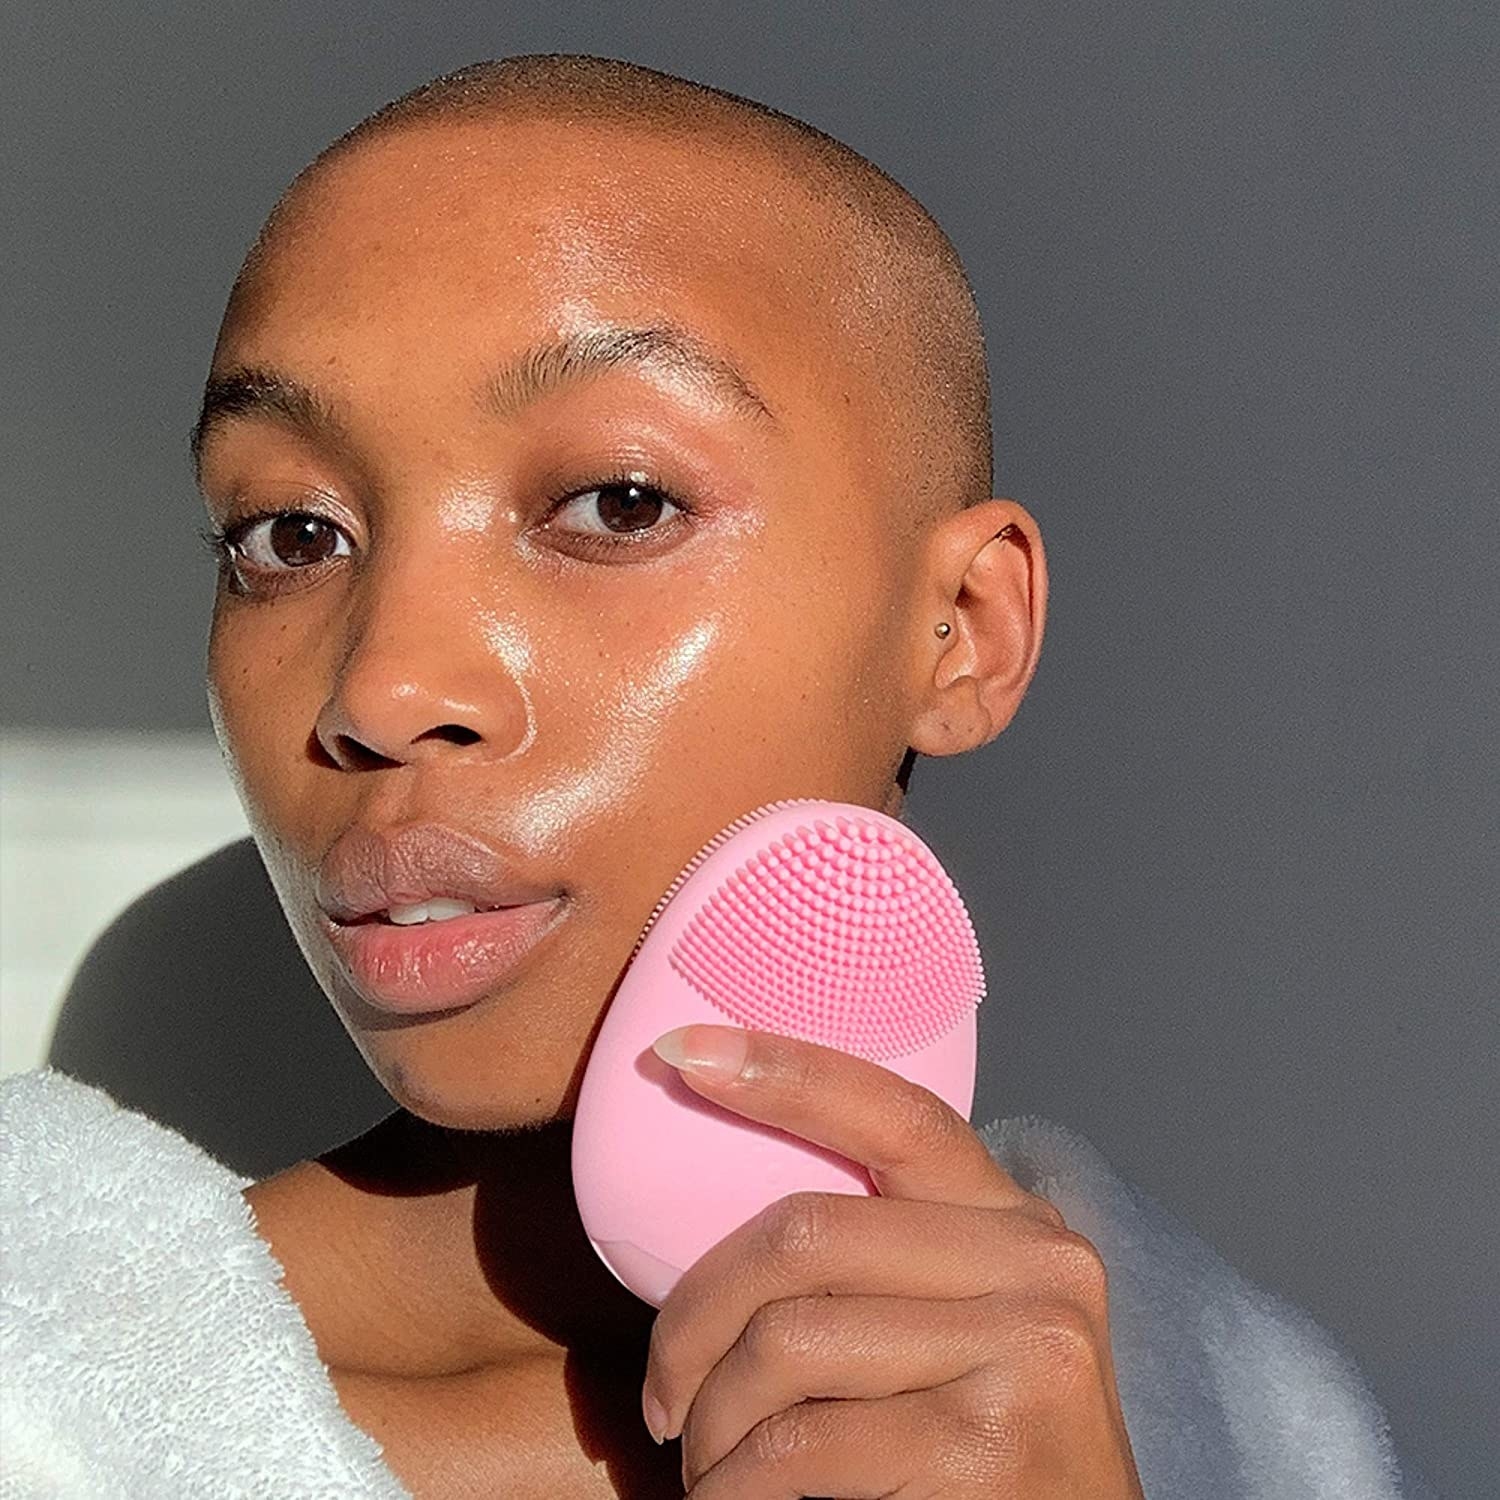 model with glowing skin using the brush